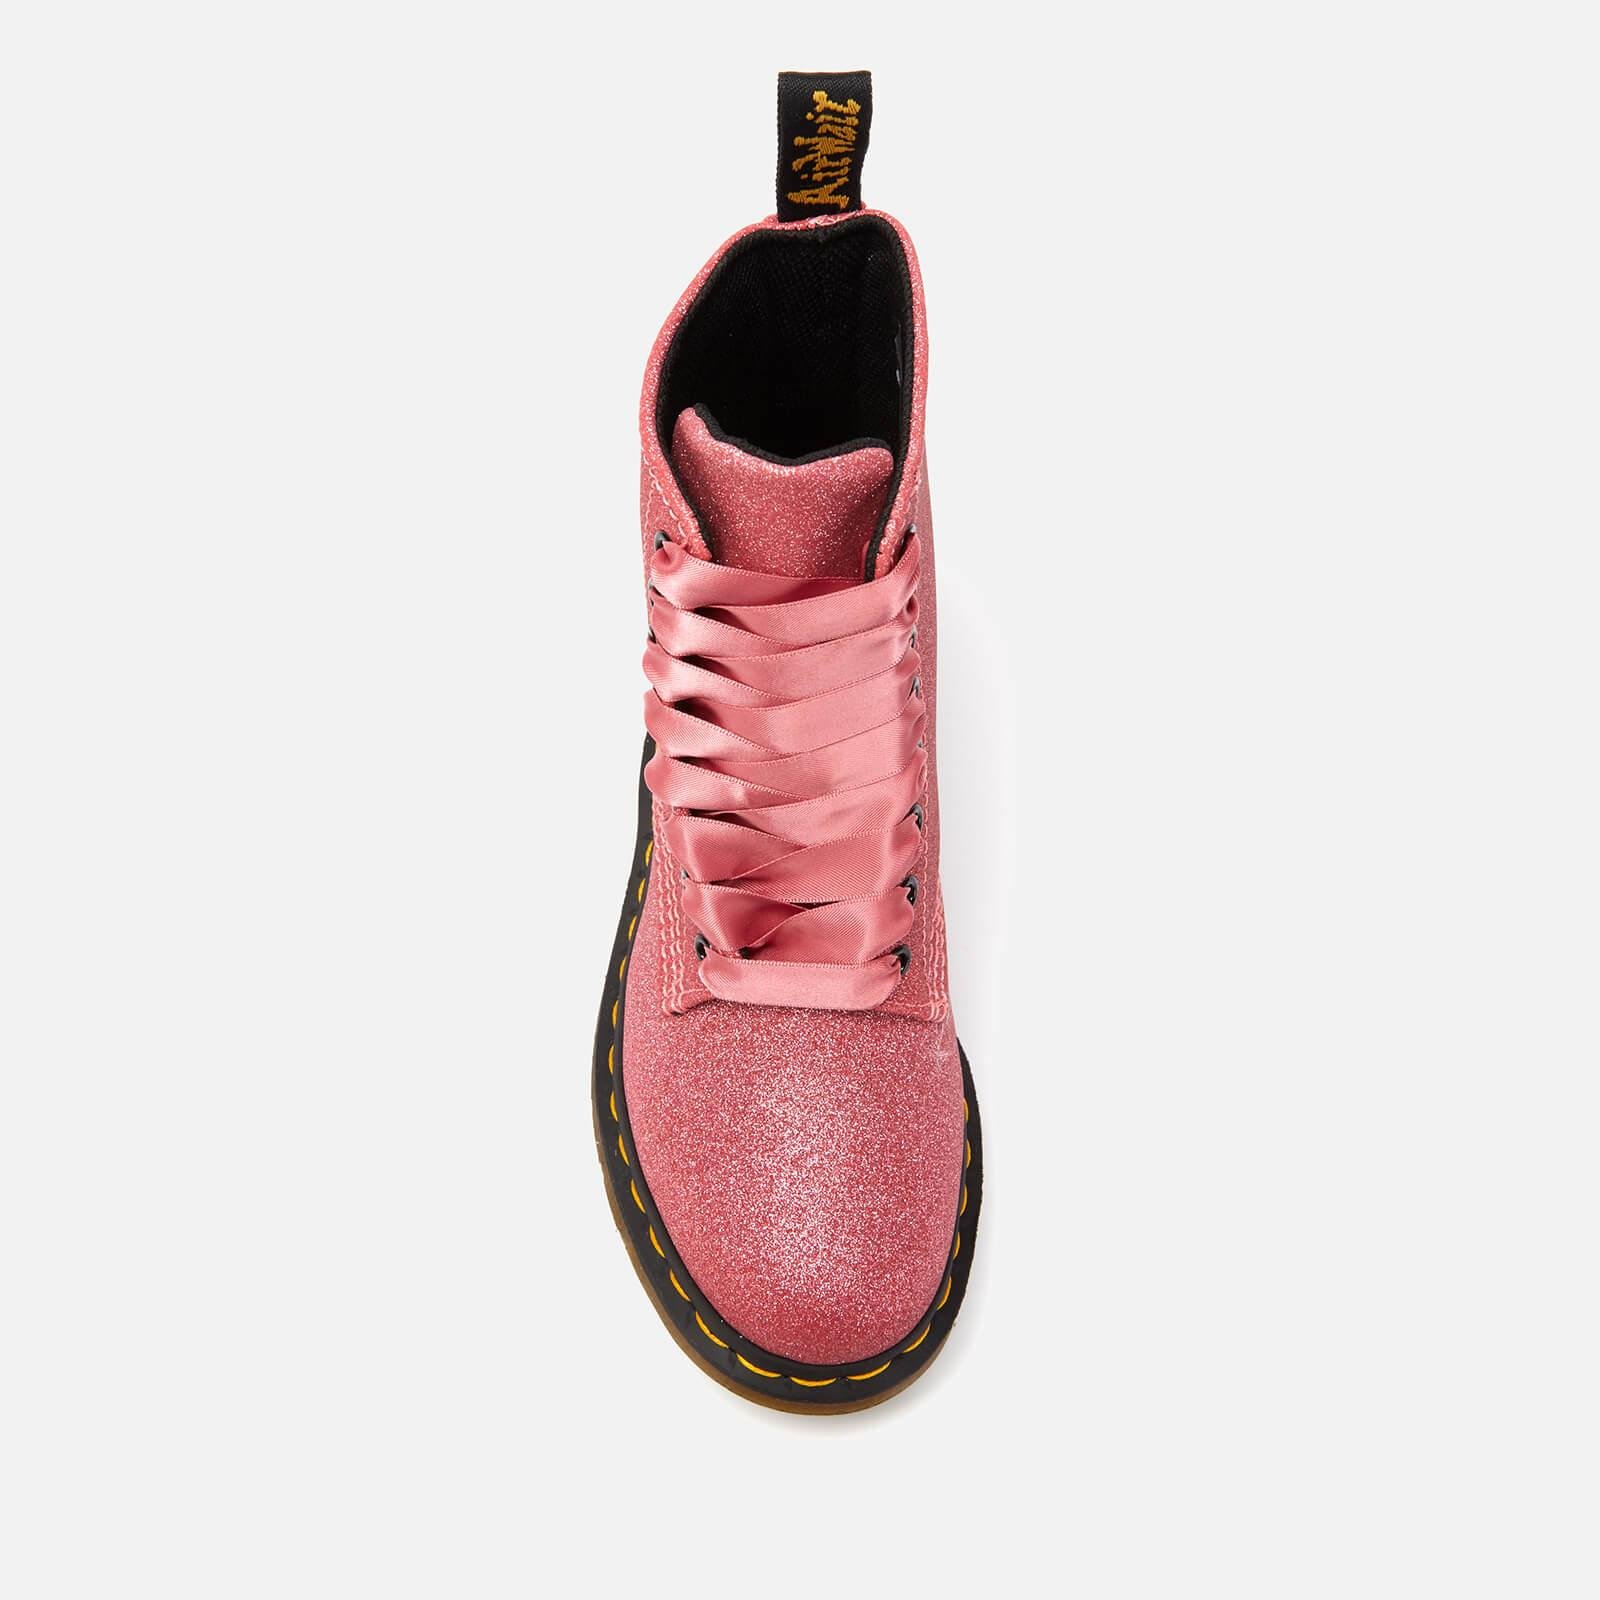 Dr. Martens 1460 Pascal Glitter Boot in Pink | Lyst UK